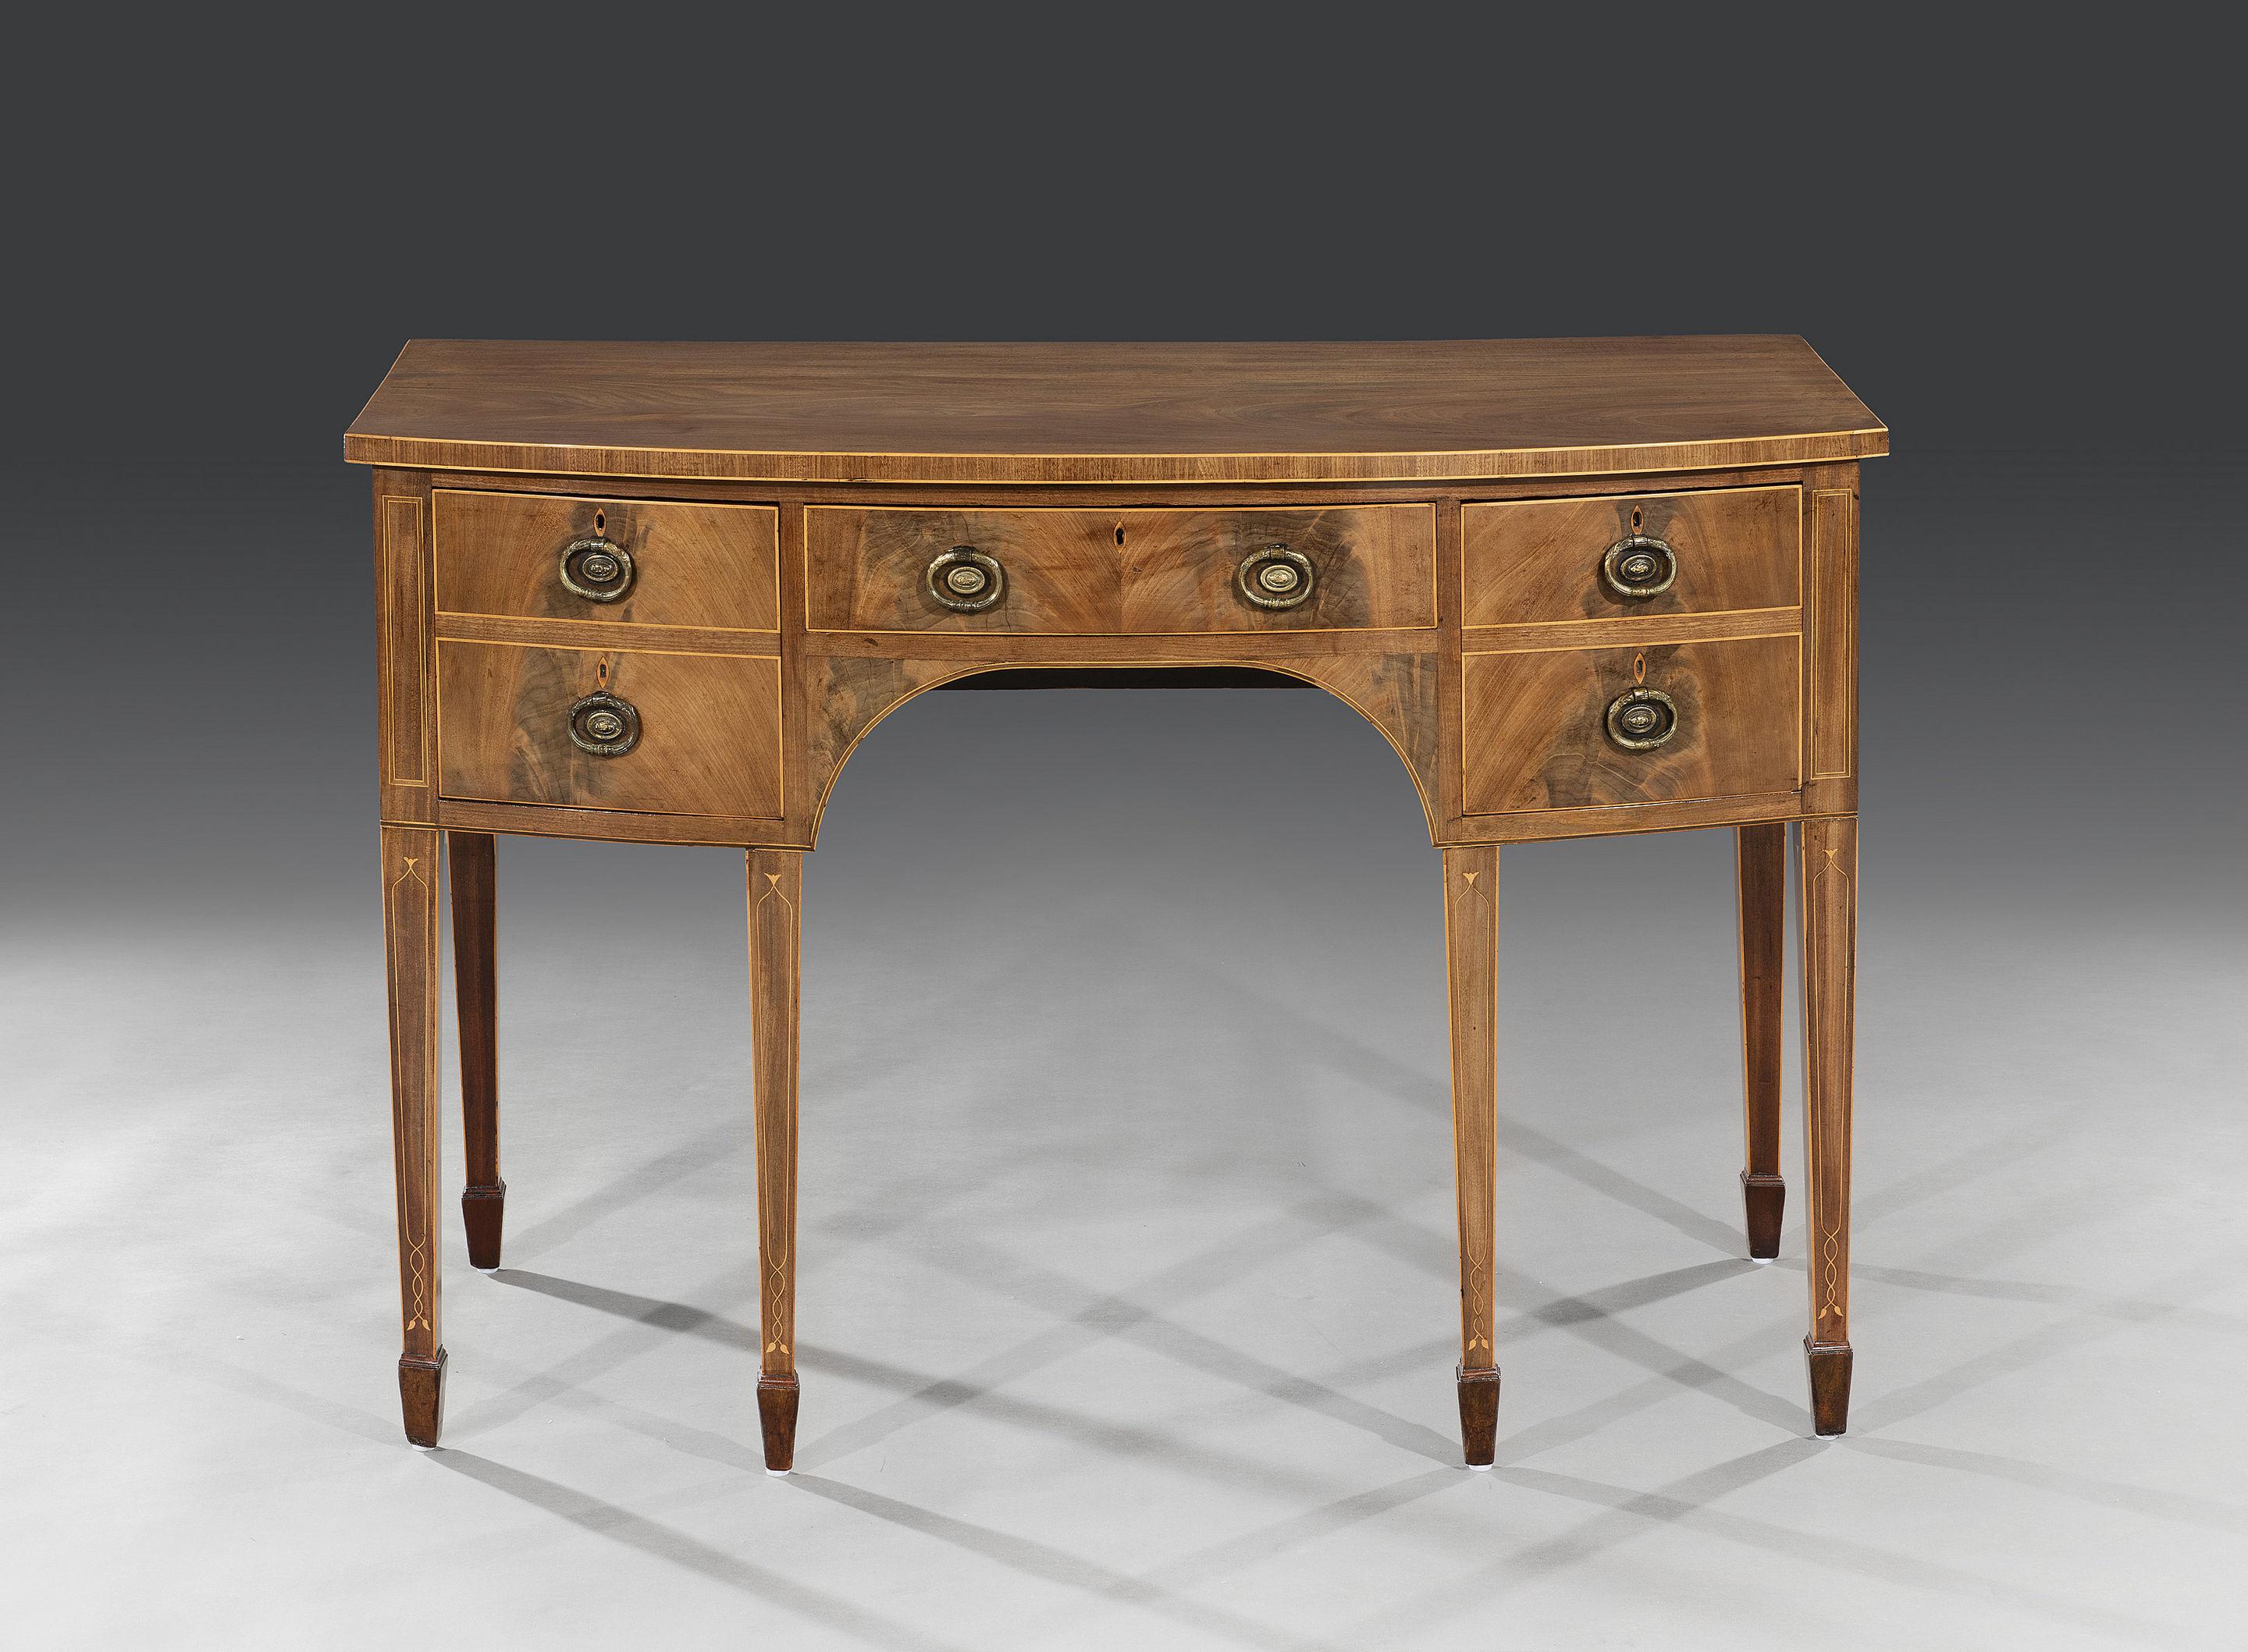 Small George III Sheraton Period Inlaid Mahogany Bow-Fronted Sideboard In Good Condition For Sale In Bradford on Avon, GB